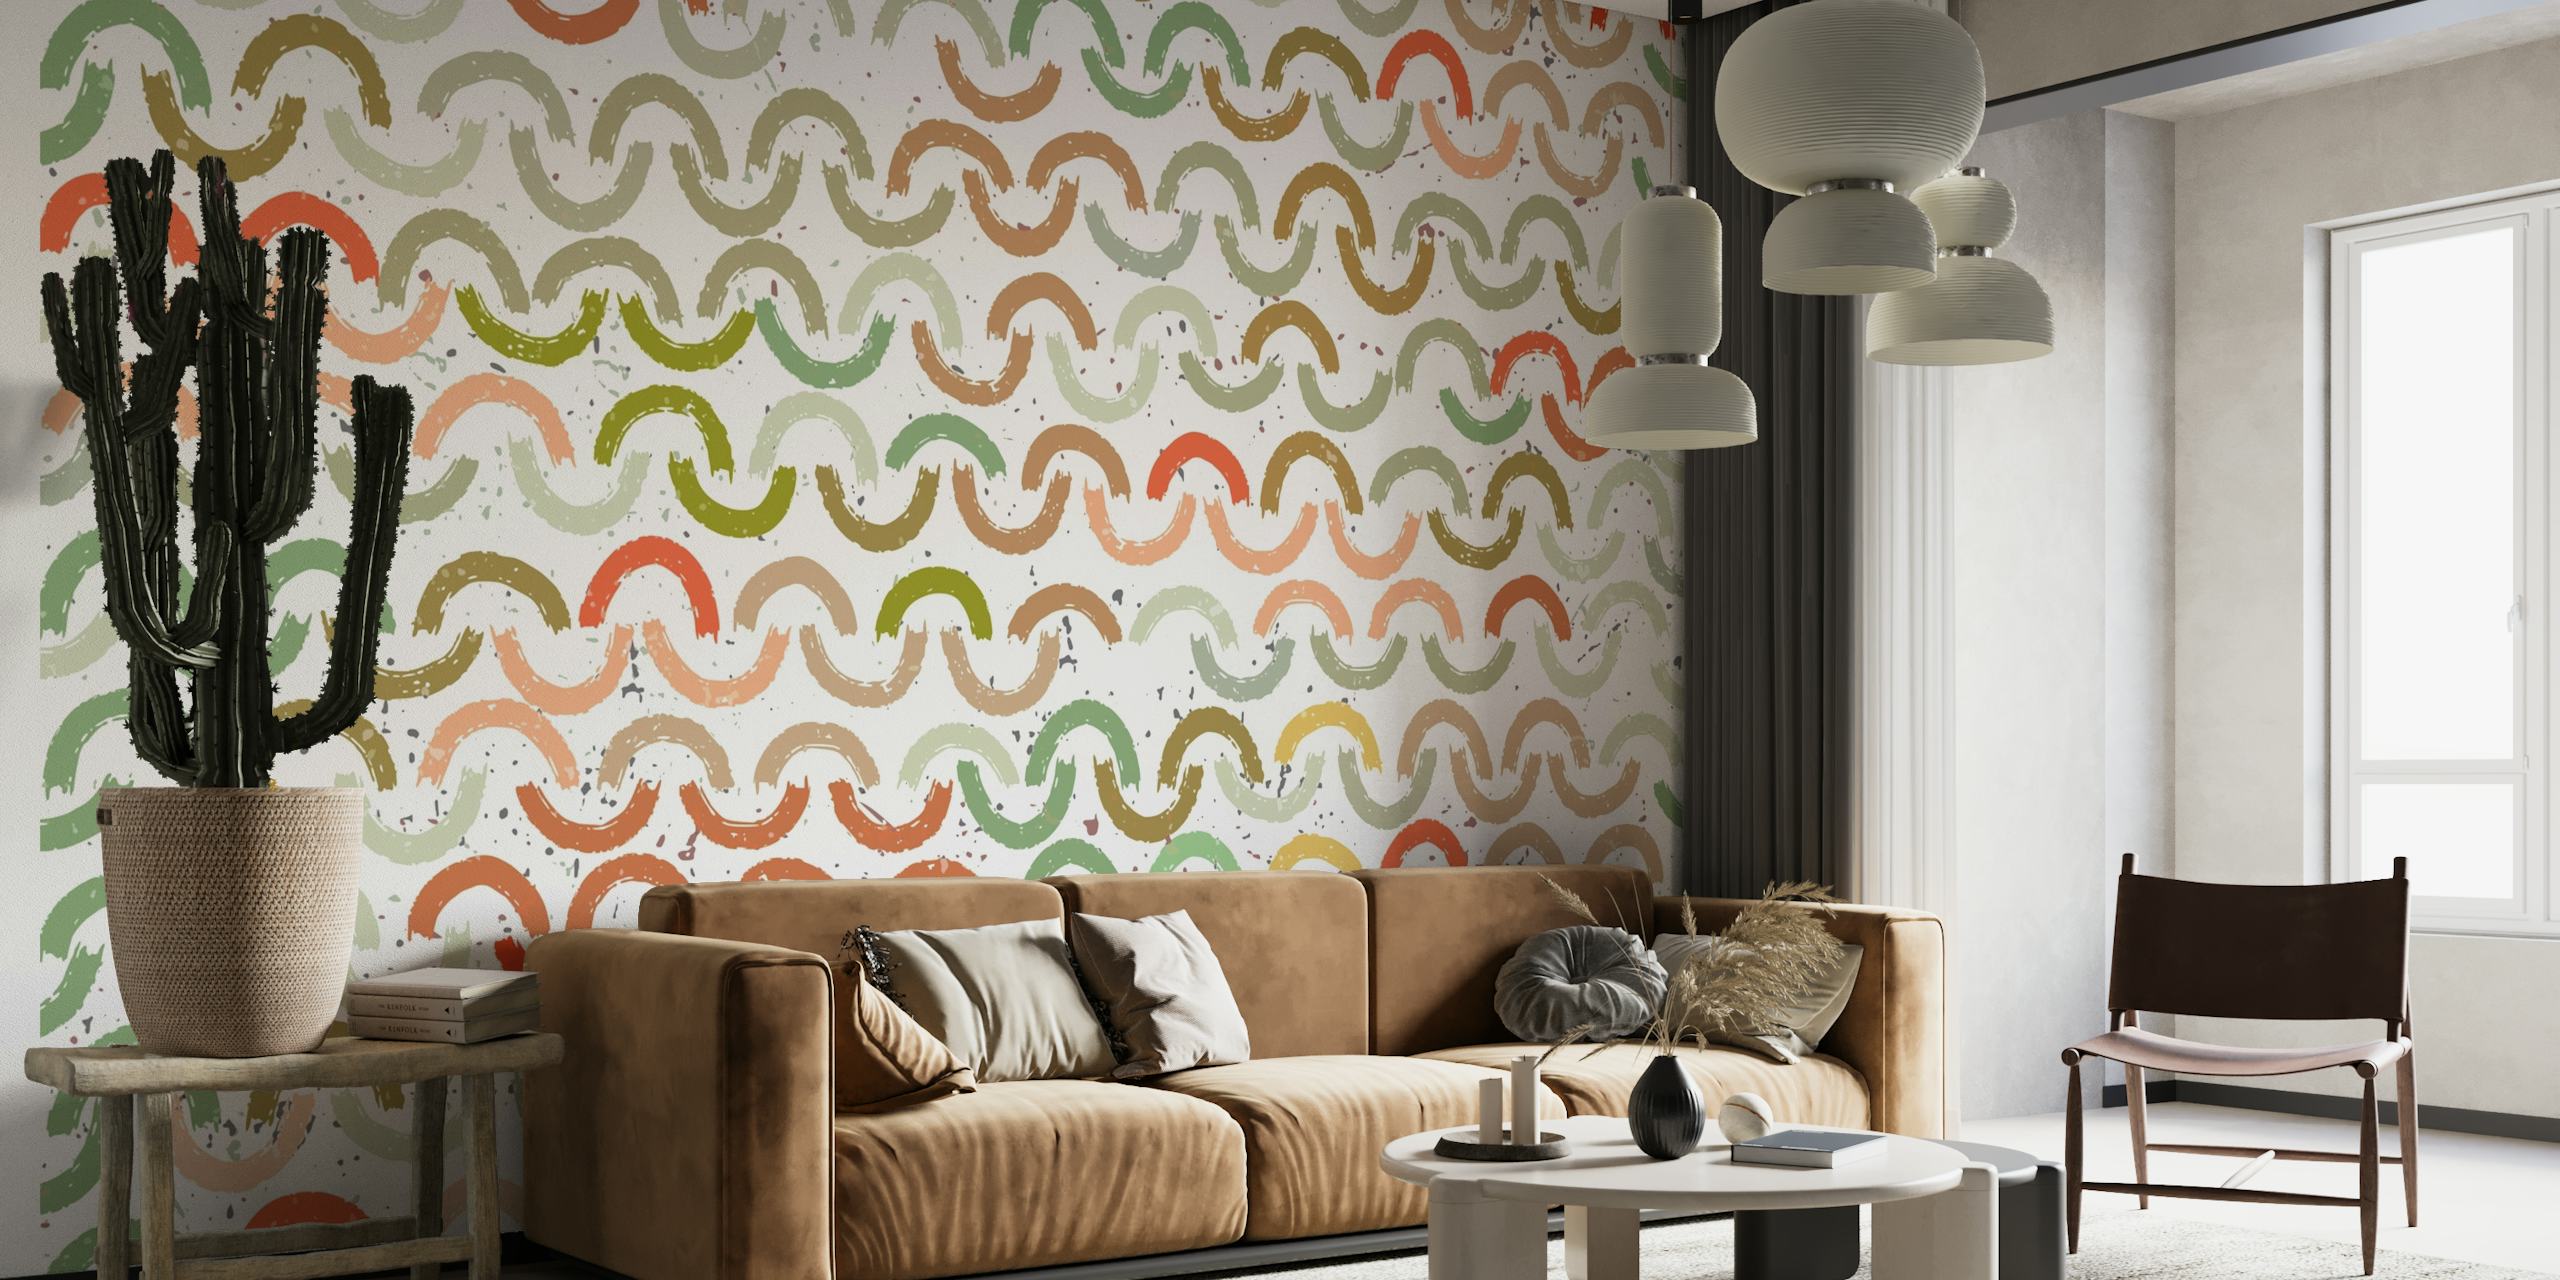 Colorful wall mural with pattern of painted arches in various shades